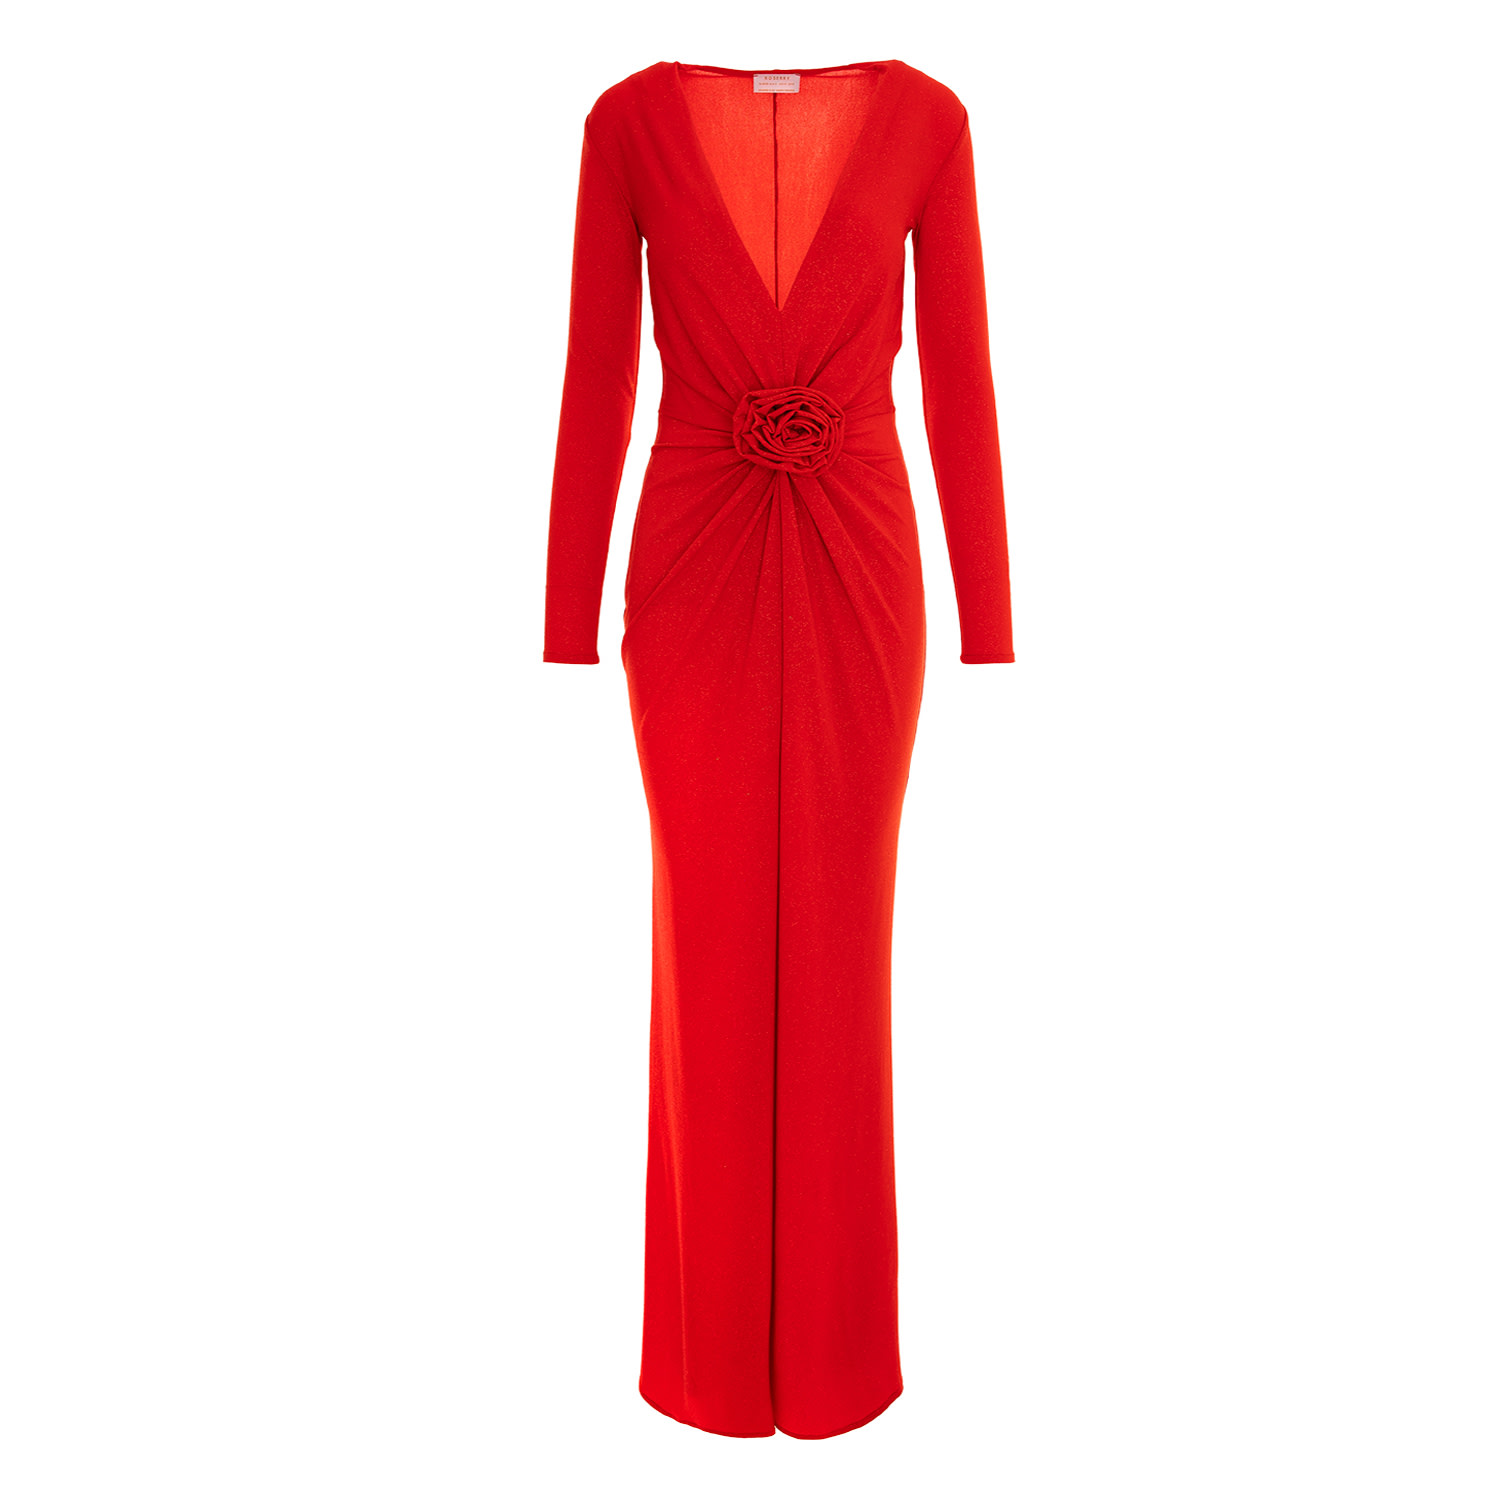 Women’s Mallorca Lurex Jersey Maxi Dress With Fixed Rosette Detail In Red M/L Roserry